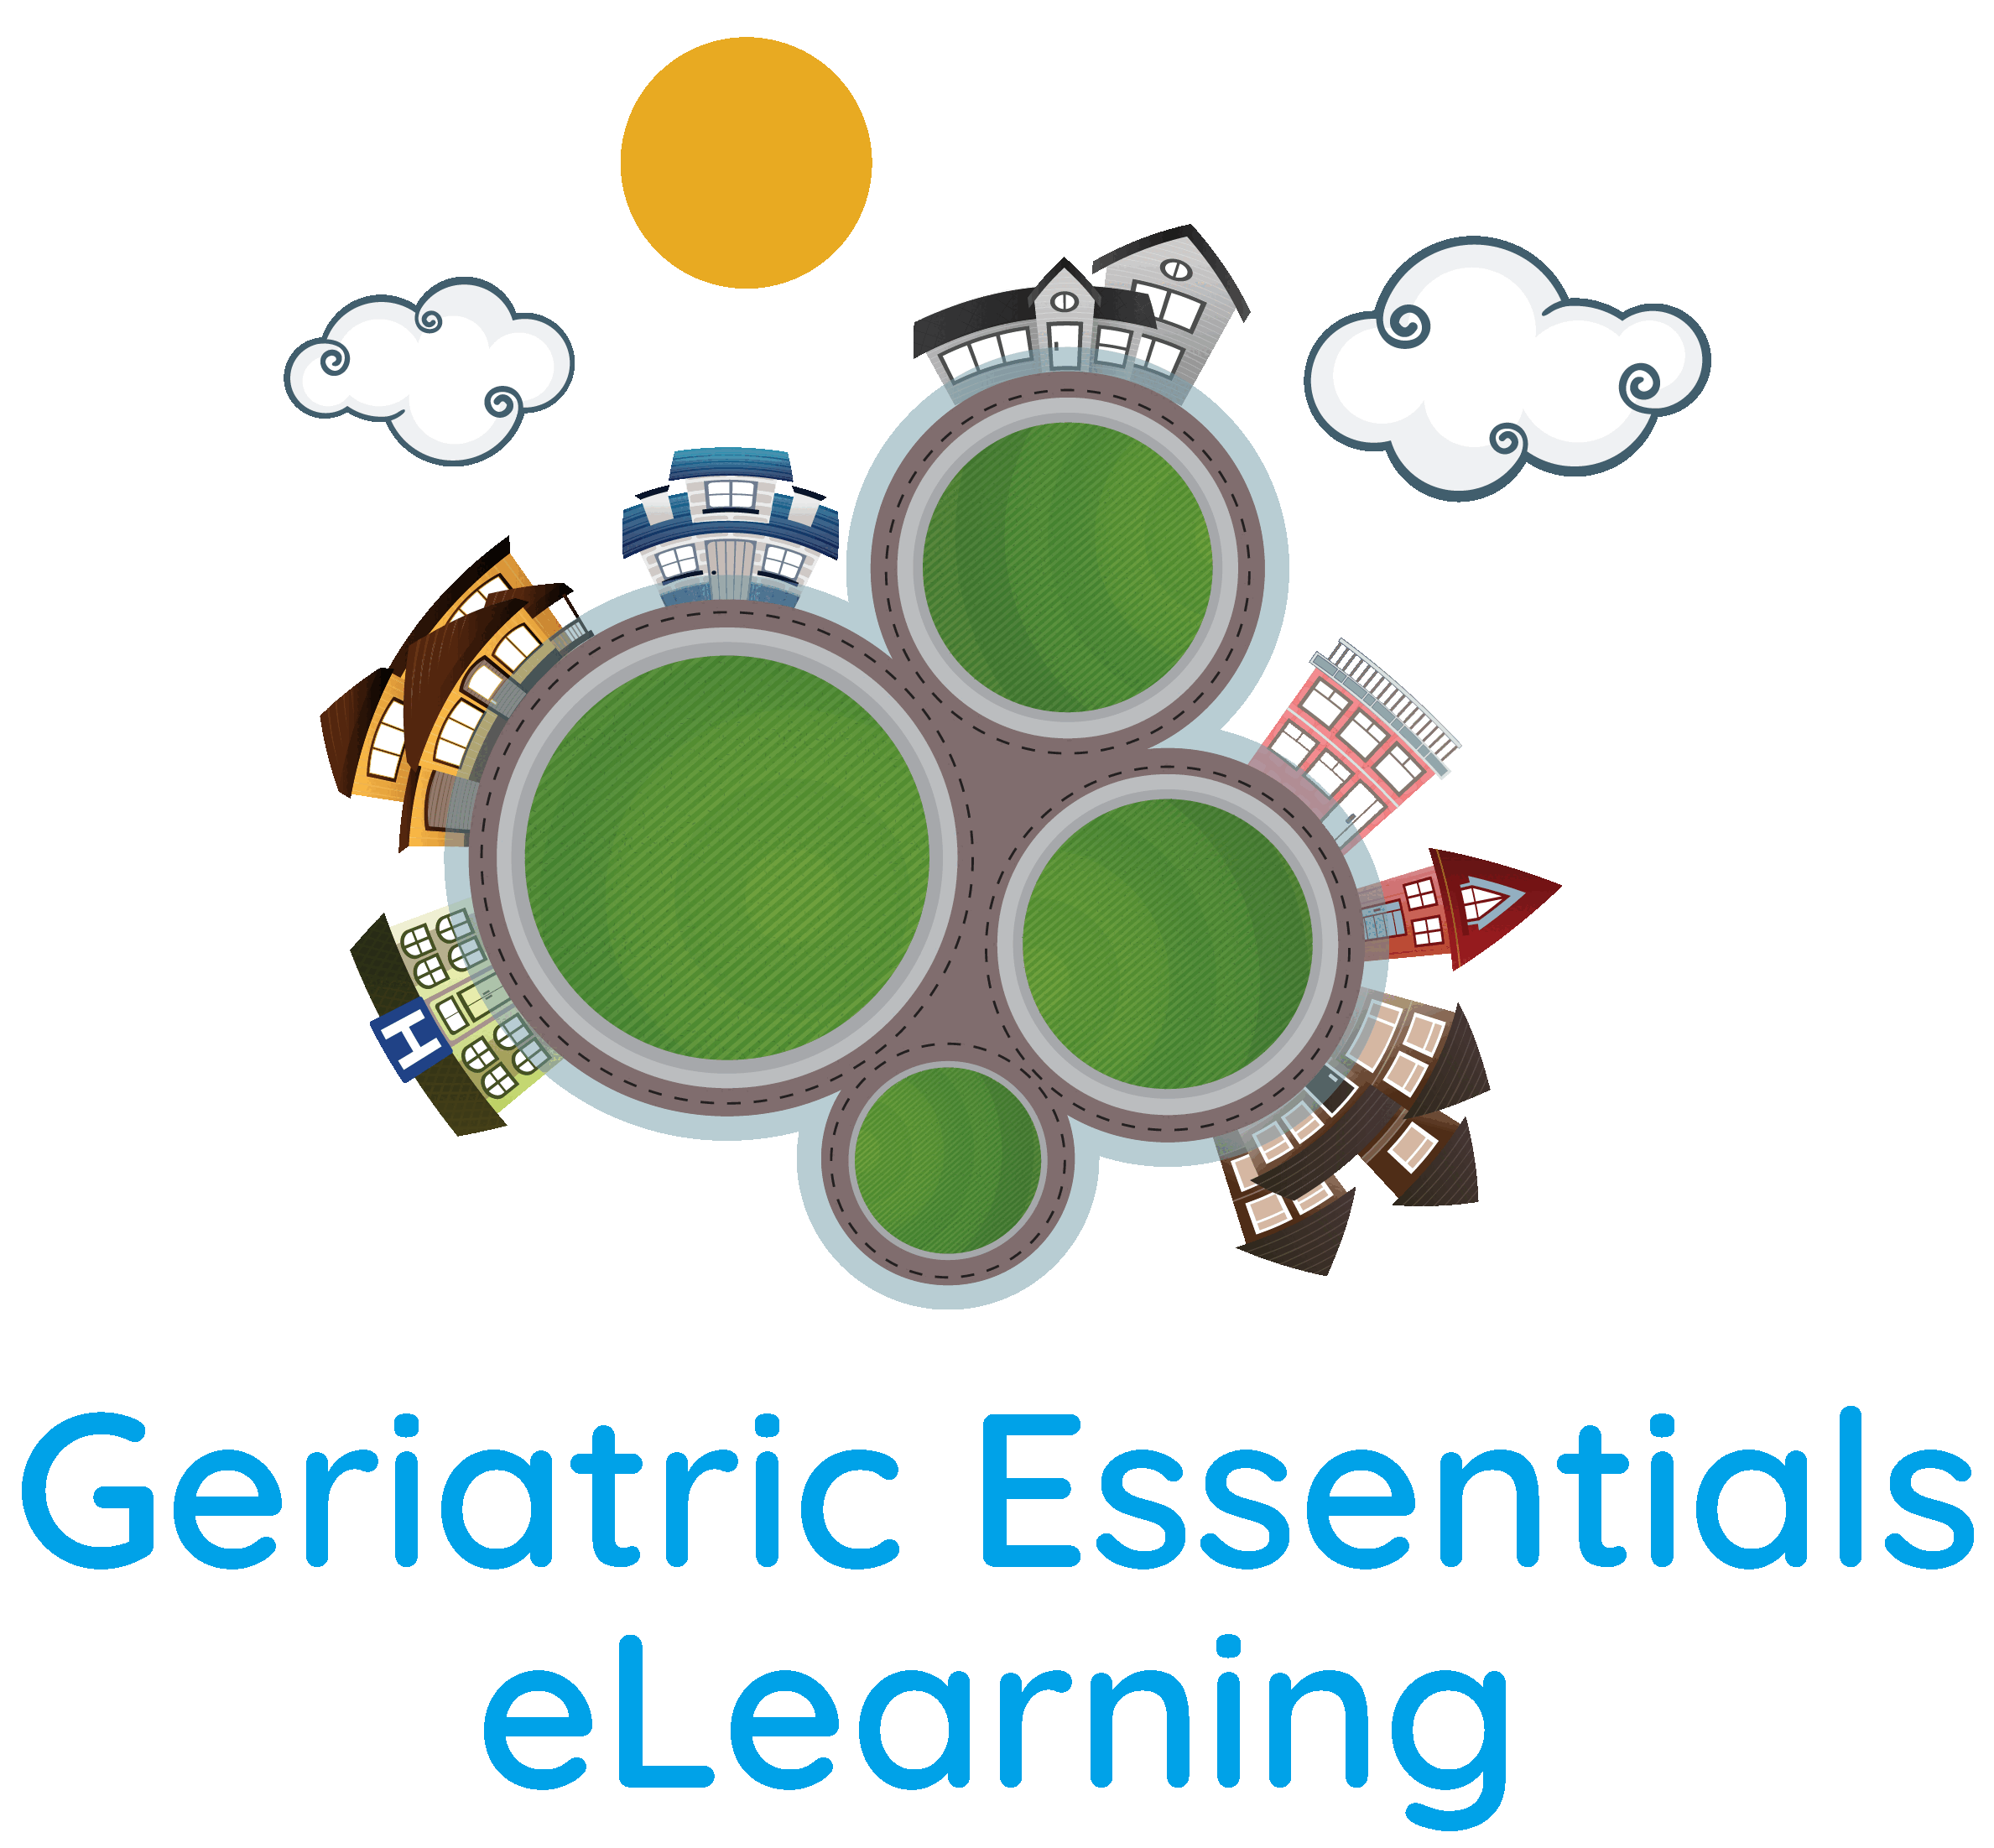 Geriatric Essentials eLearning (Previously Frailty eLearning Modules)